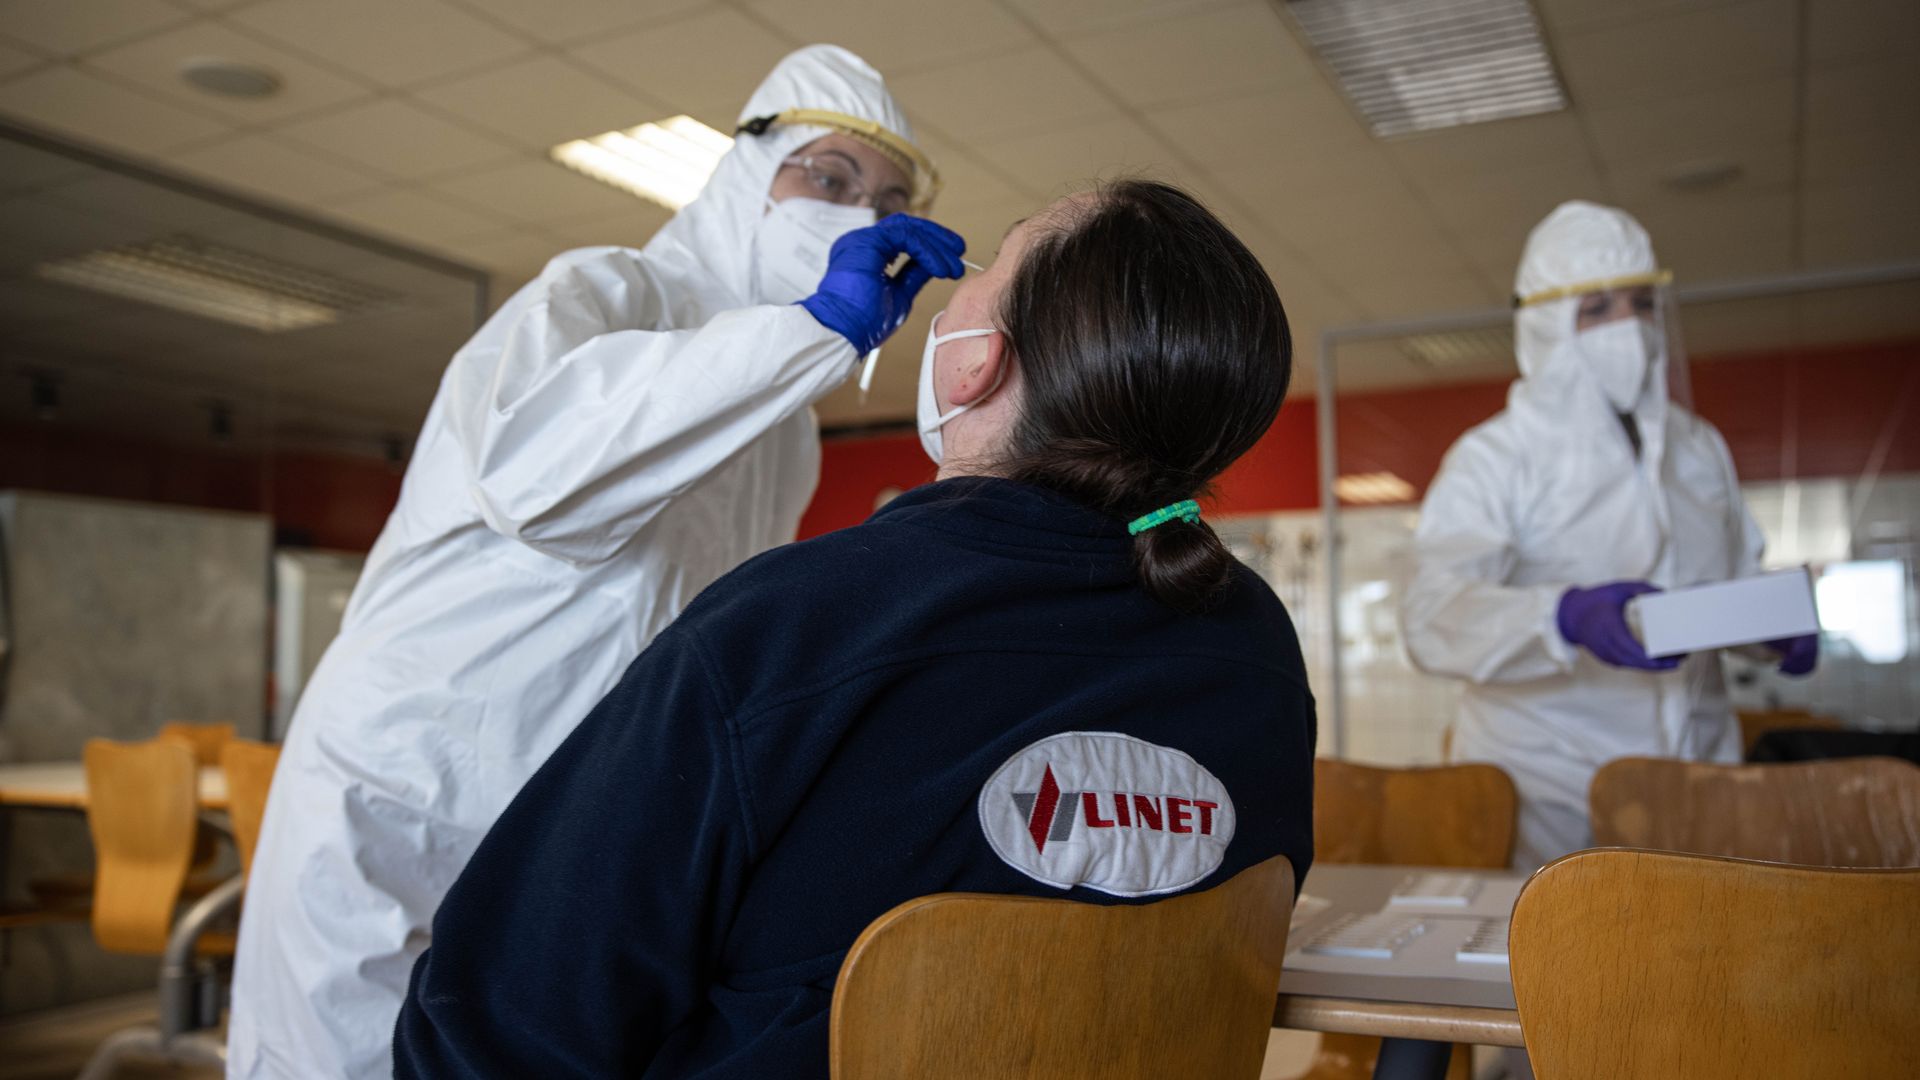 A healthcare worker administering a coronavirus test on a person in Slany, Czech Republic, on March 5.